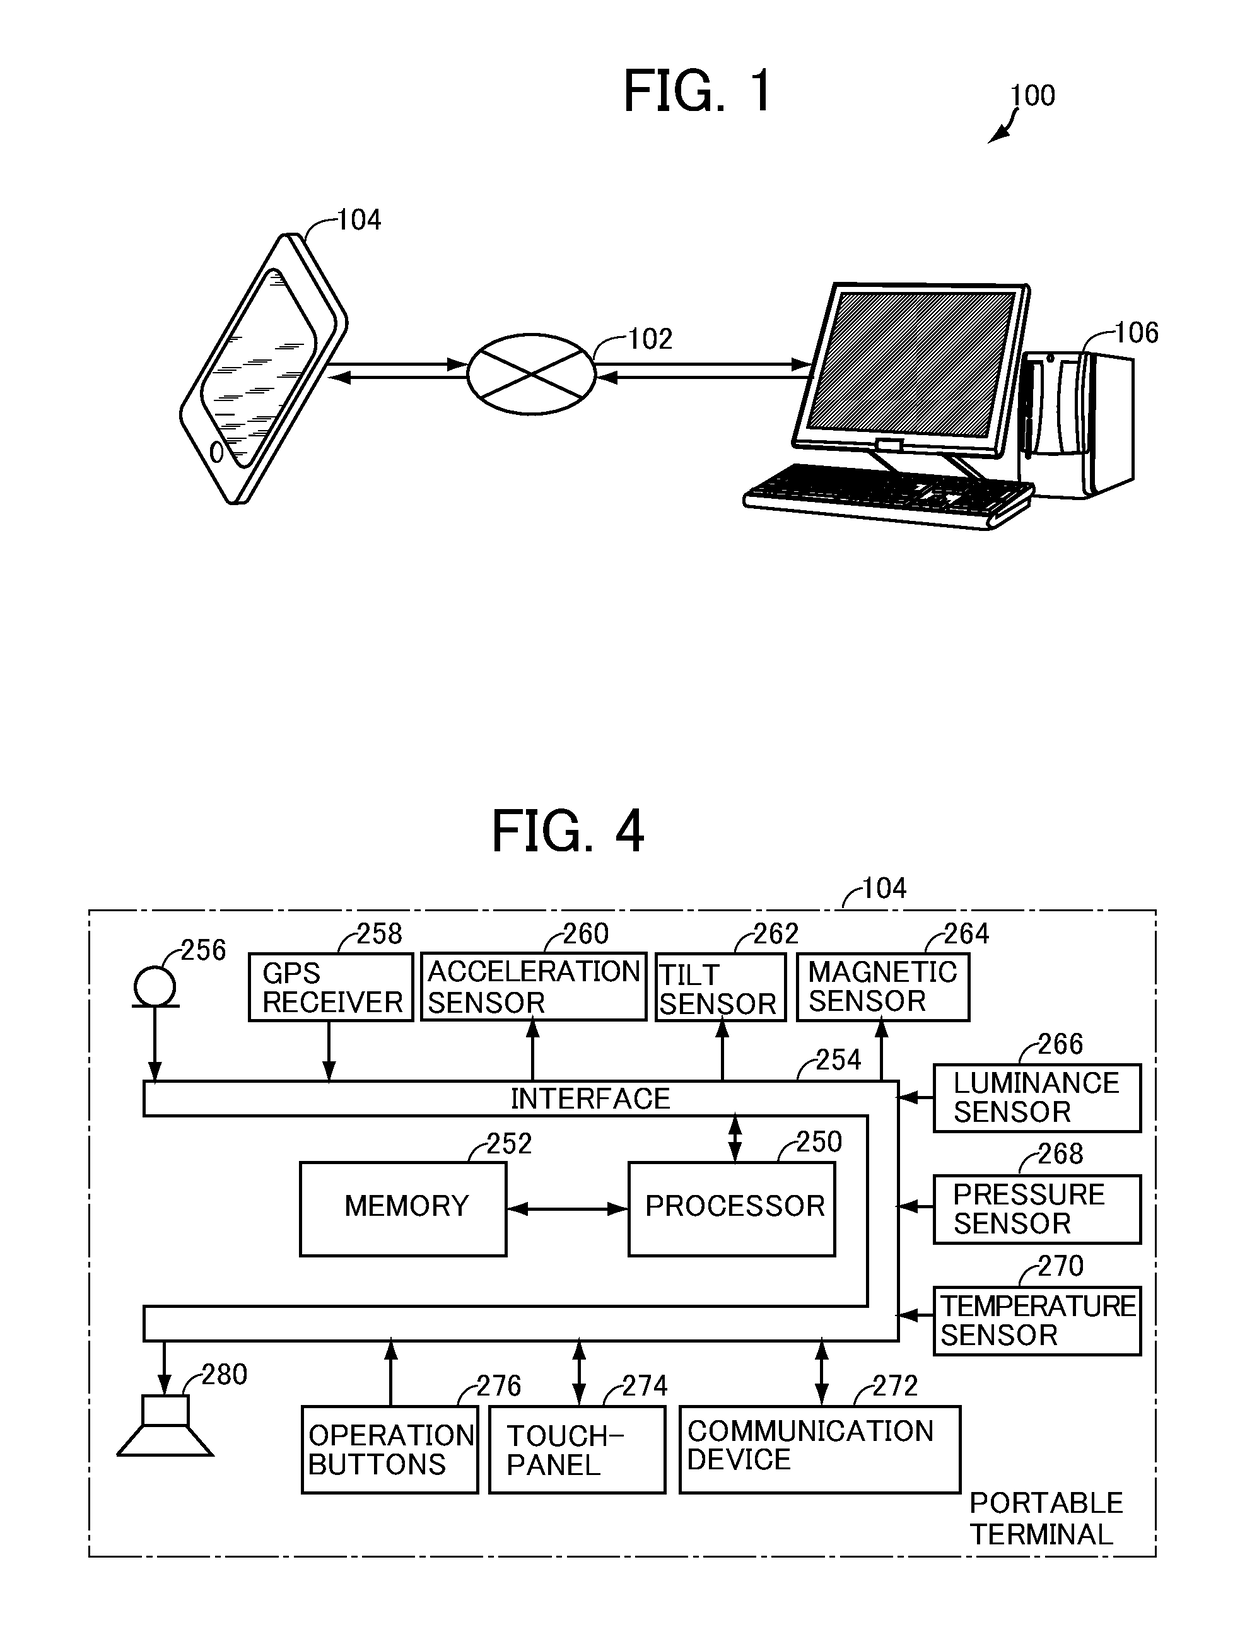 Speech processing system and terminal